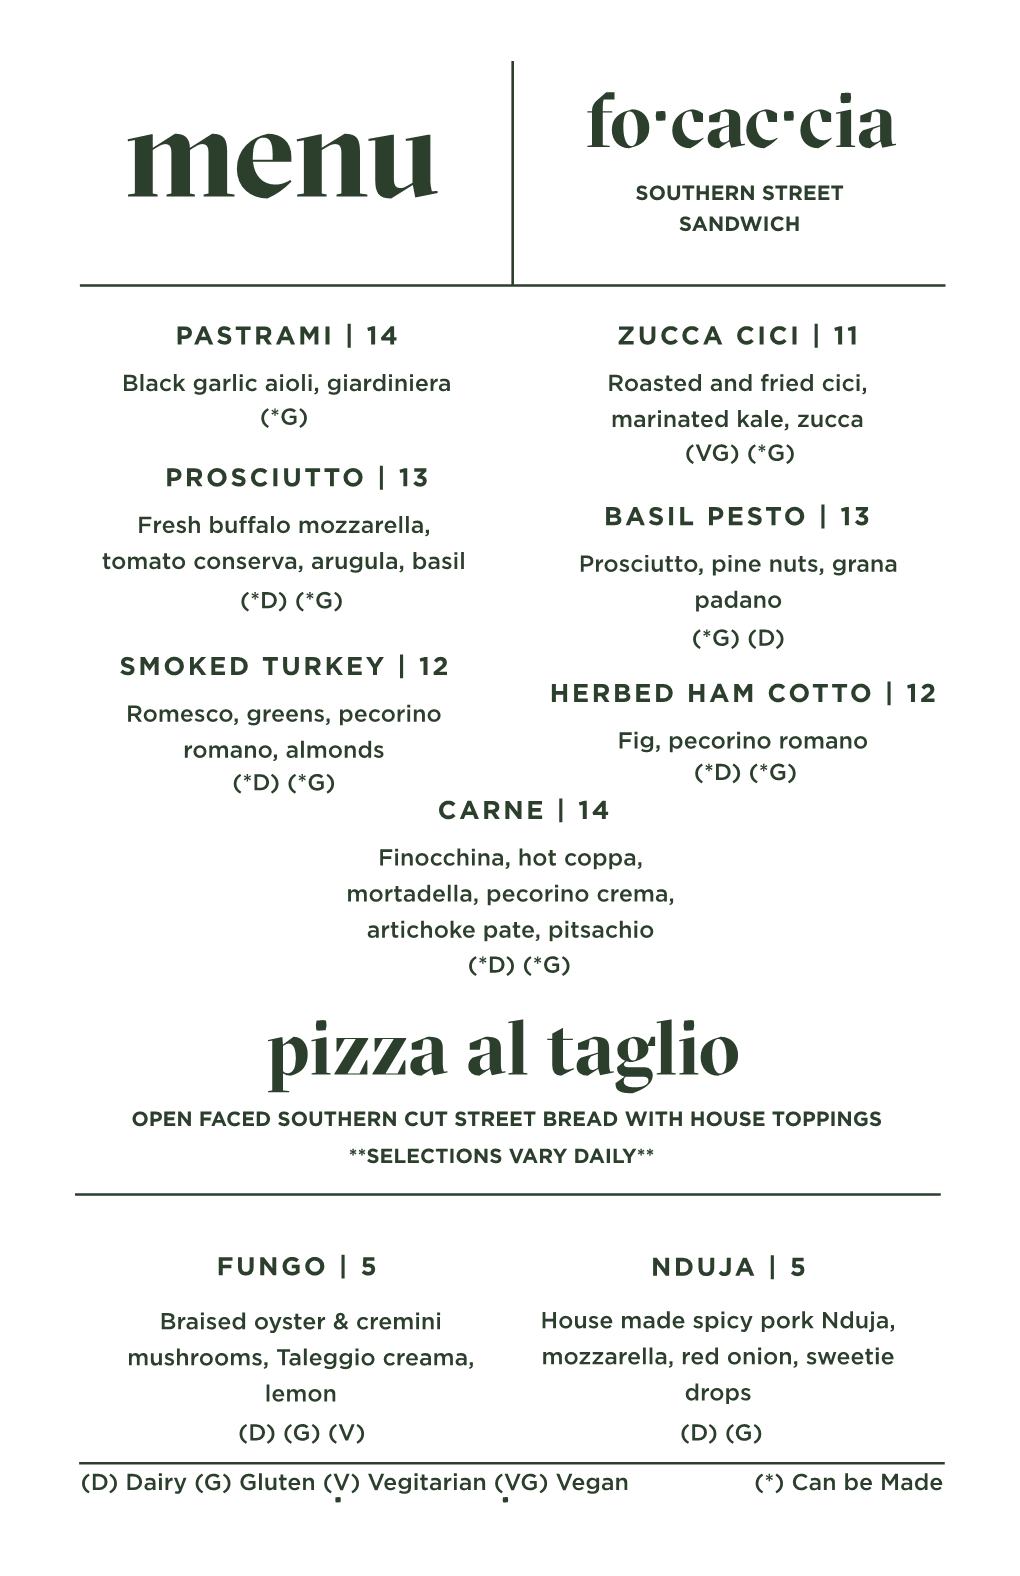 Pizza Al Taglio OPEN FACED SOUTHERN CUT STREET BREAD with HOUSE TOPPINGS **SELECTIONS VARY DAILY**